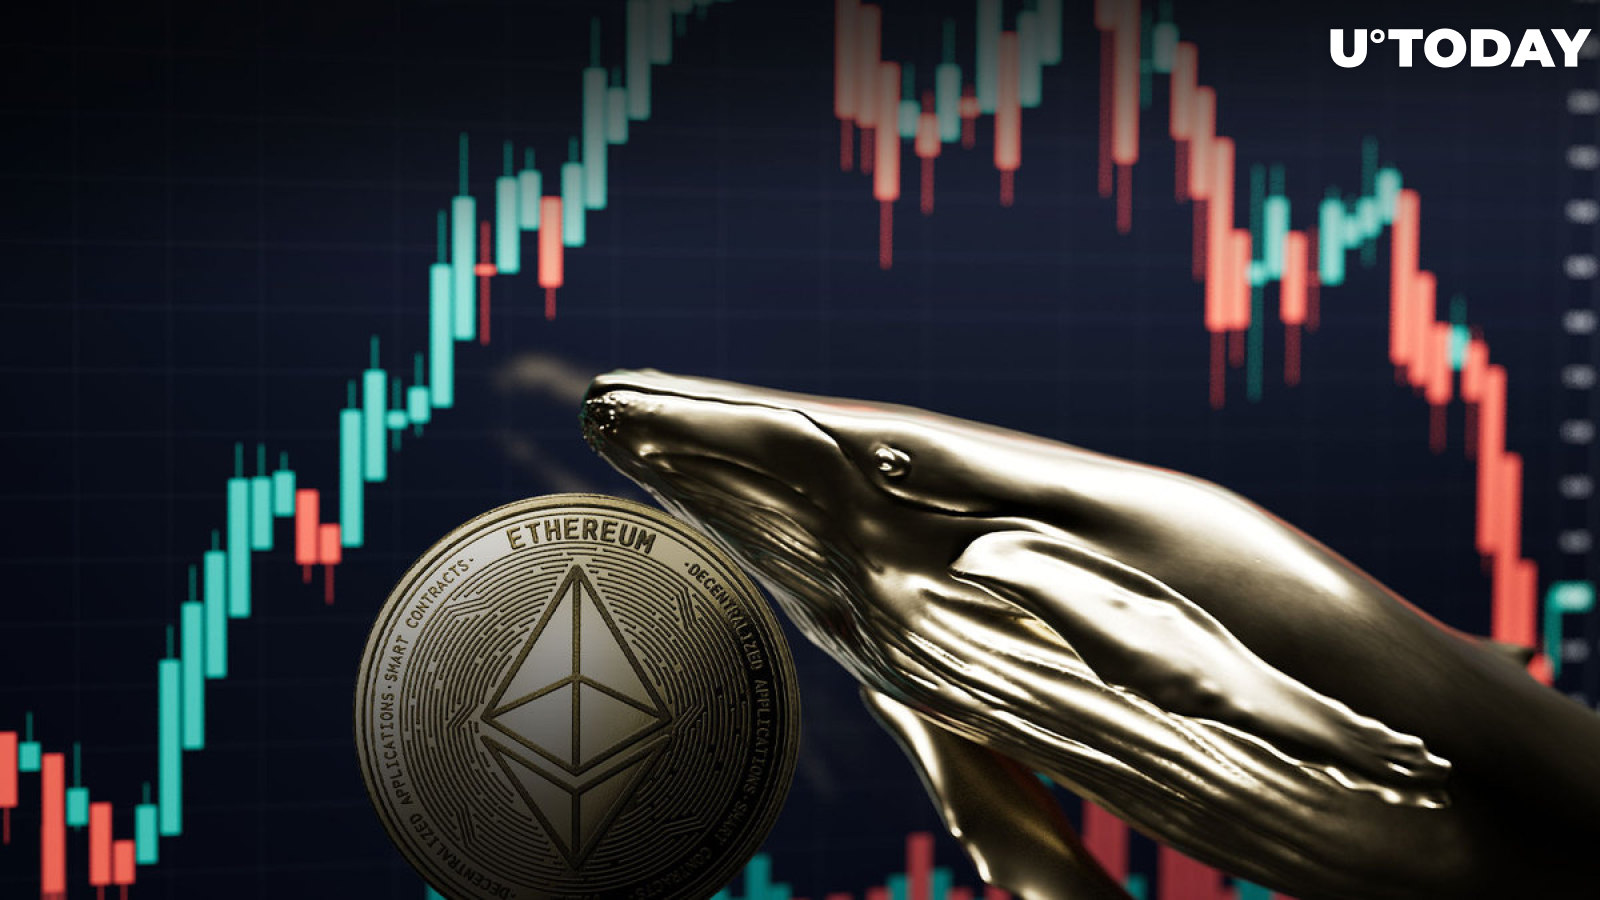 320,000 ETH Moved by Whales, Here's How Ethereum Price Reacted